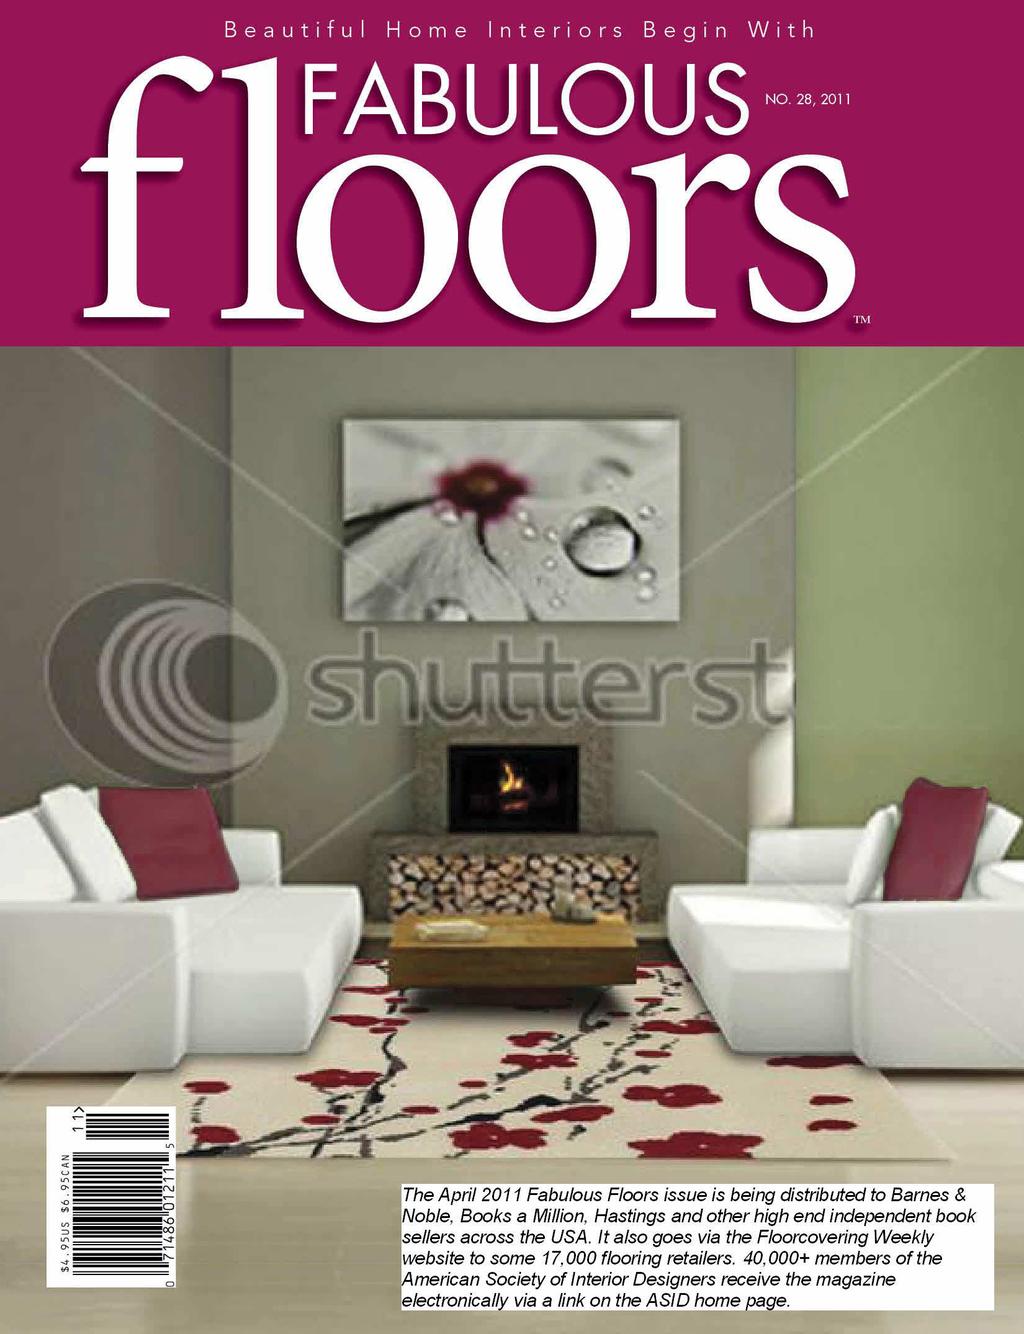 , MI M. 010 IM1 - IP- ''%umilw MOP The April 2011 Fabulous Floors issue is being distributed to Barnes & Noble. Books a Million. Hastings and other high end independent book sellers across the USA.